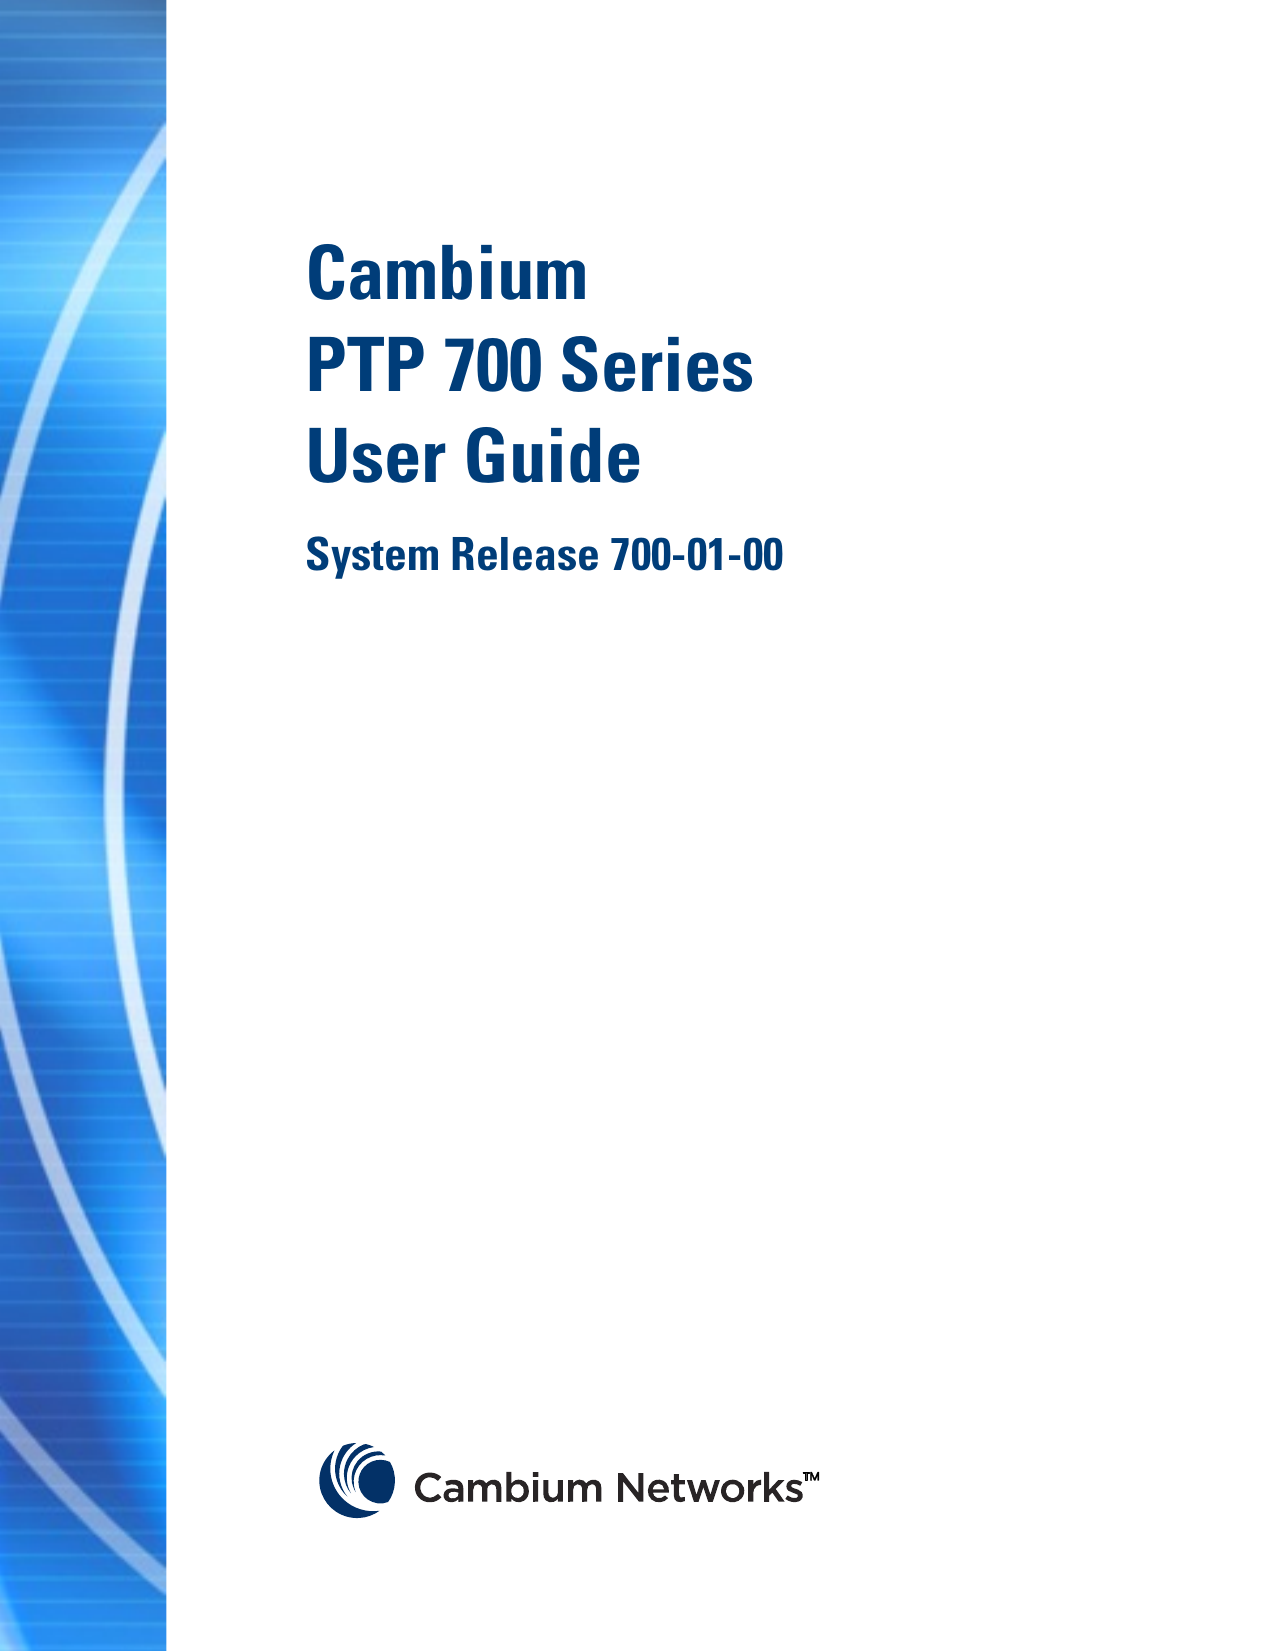 F  Cambium  PTP 700 Series  User Guide System Release 700-01-00                       